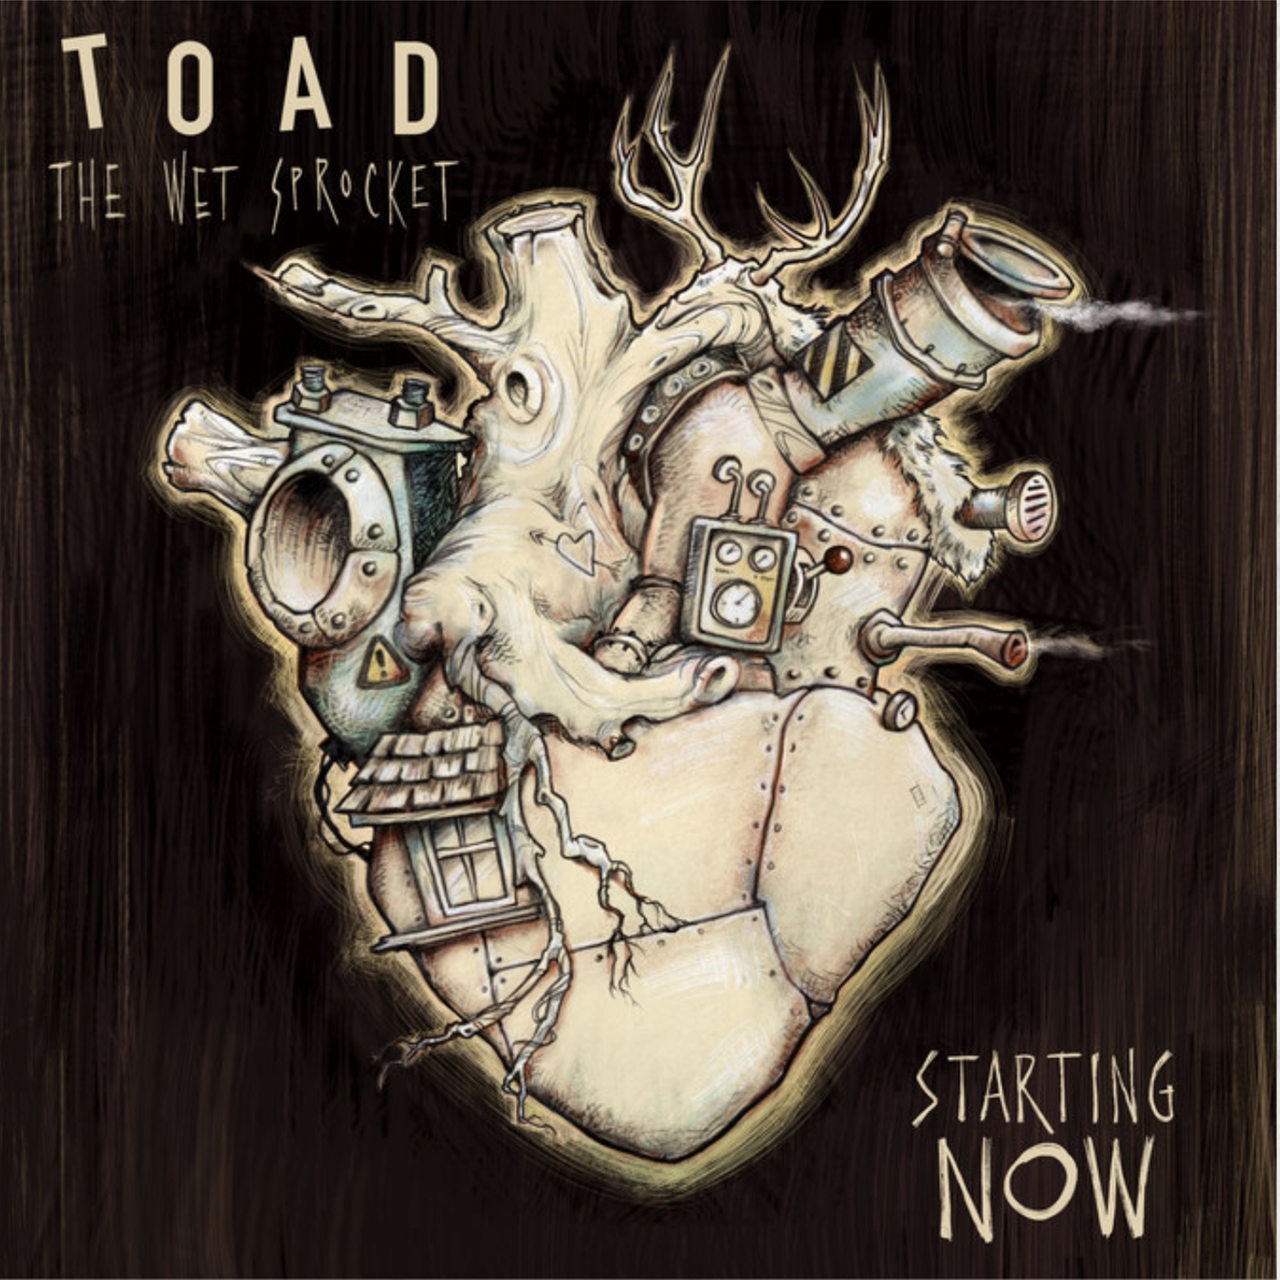 Cover: Toad The Wet Sprocket, Starting Now, SRG/ILS Group